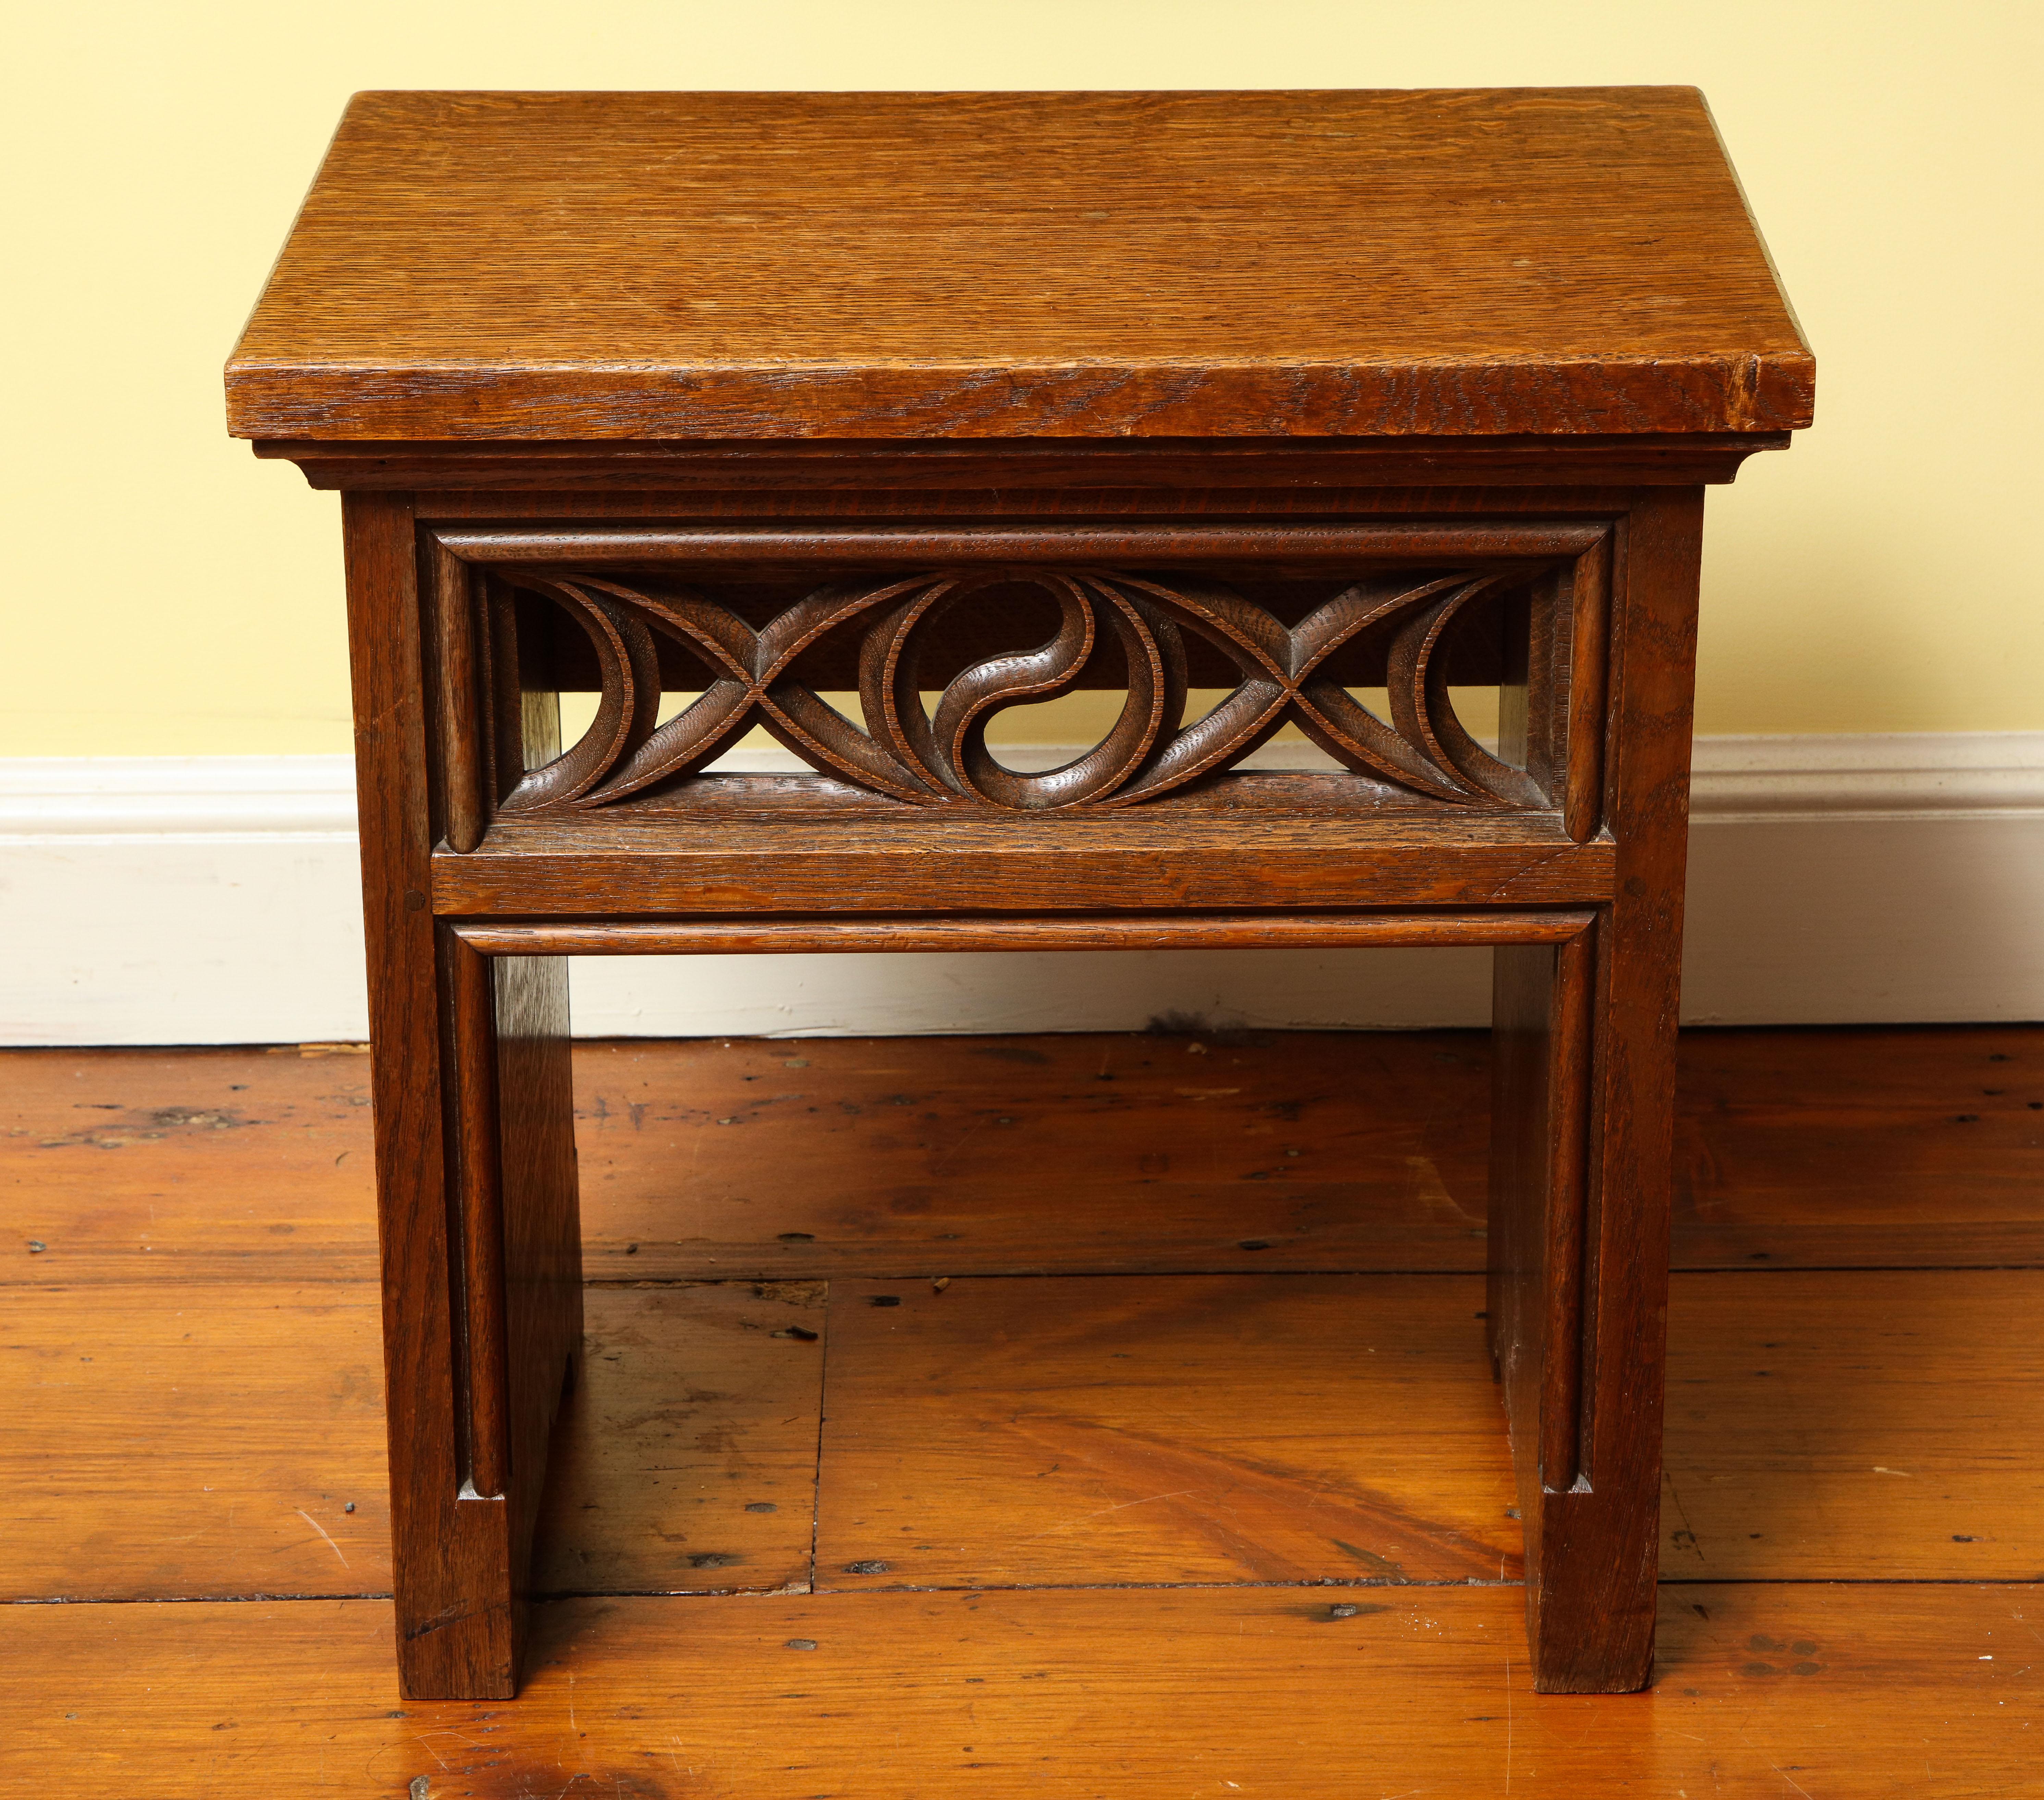 Arts and Crafts Pair of Pugin Style Gothic Revival Rectangular Oak Benches, English, Circa 1880 For Sale